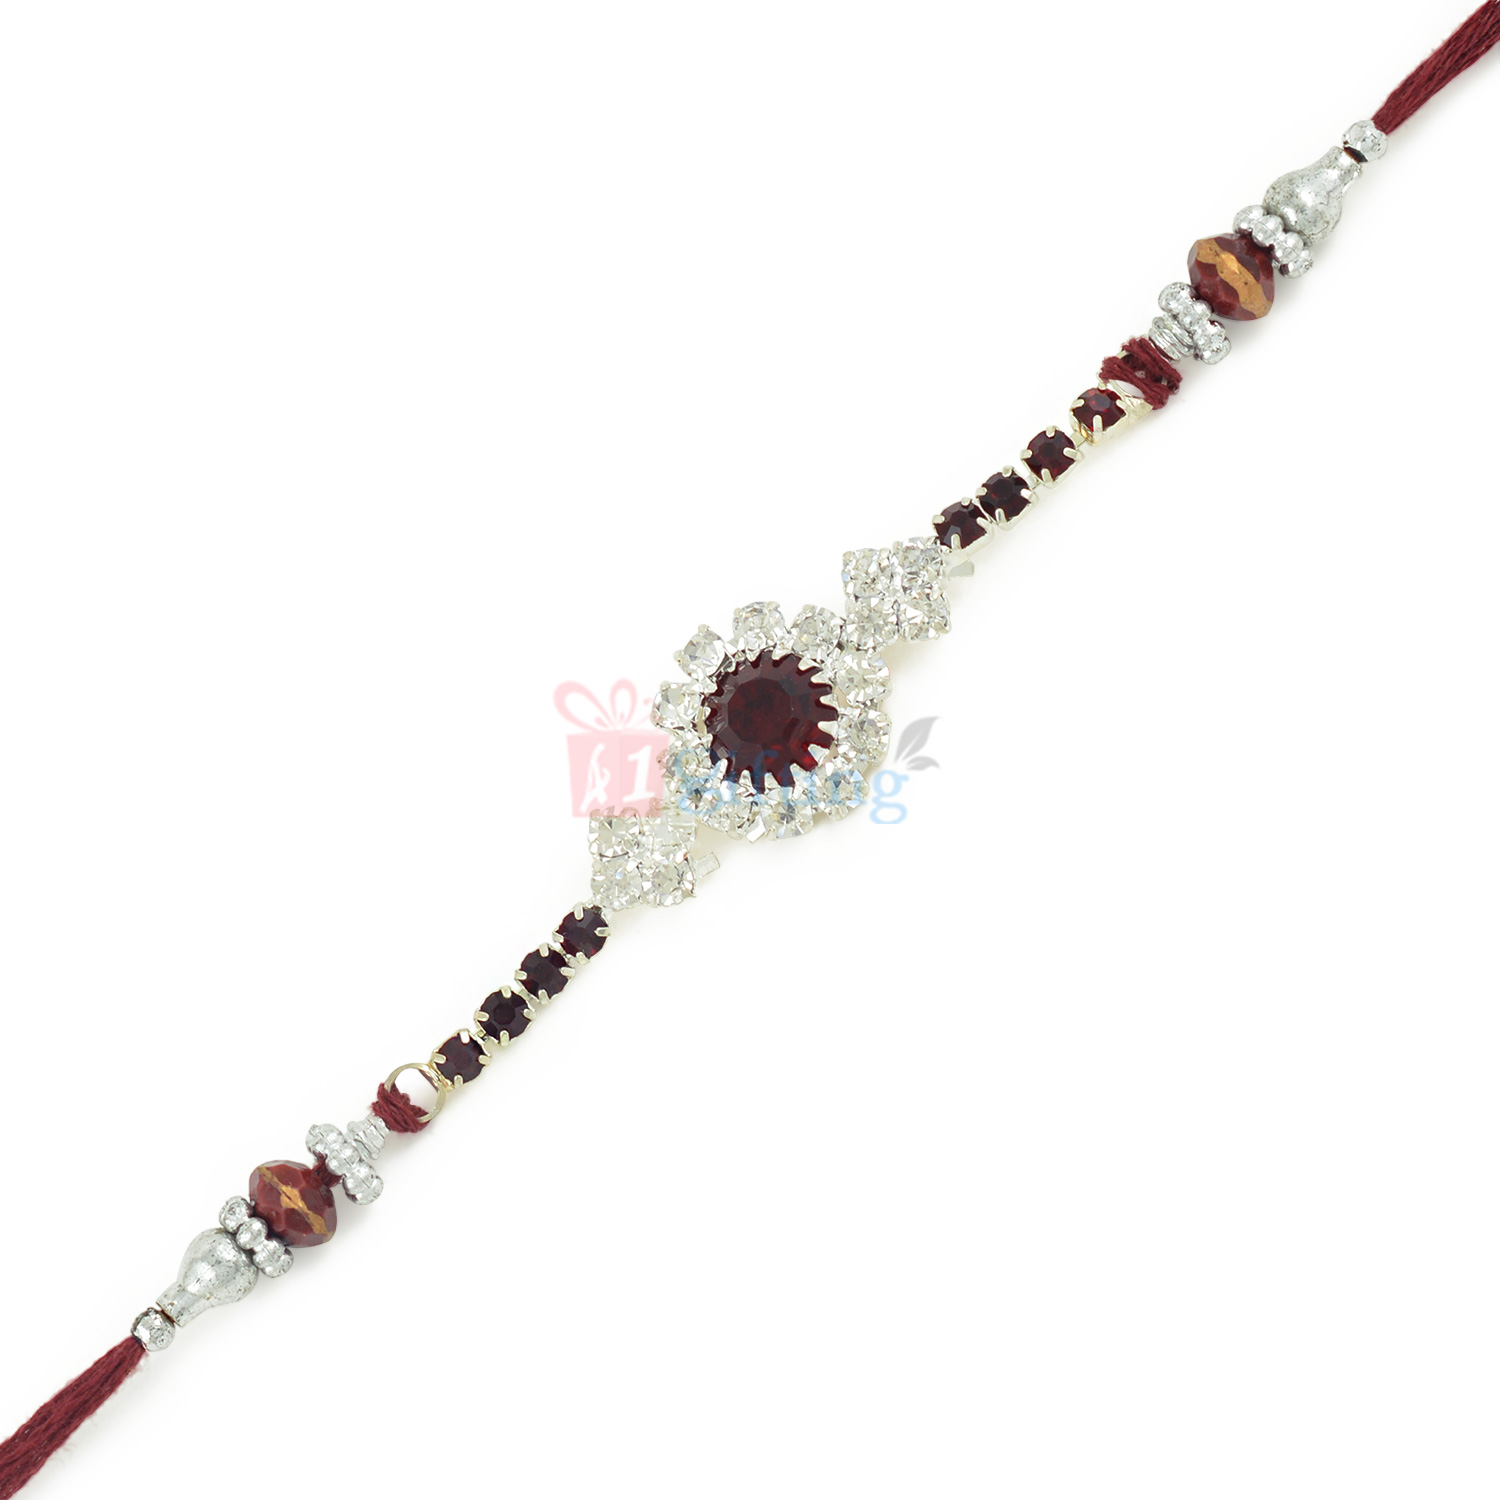 Maroon Jewel and Silver Rakhi for Brother